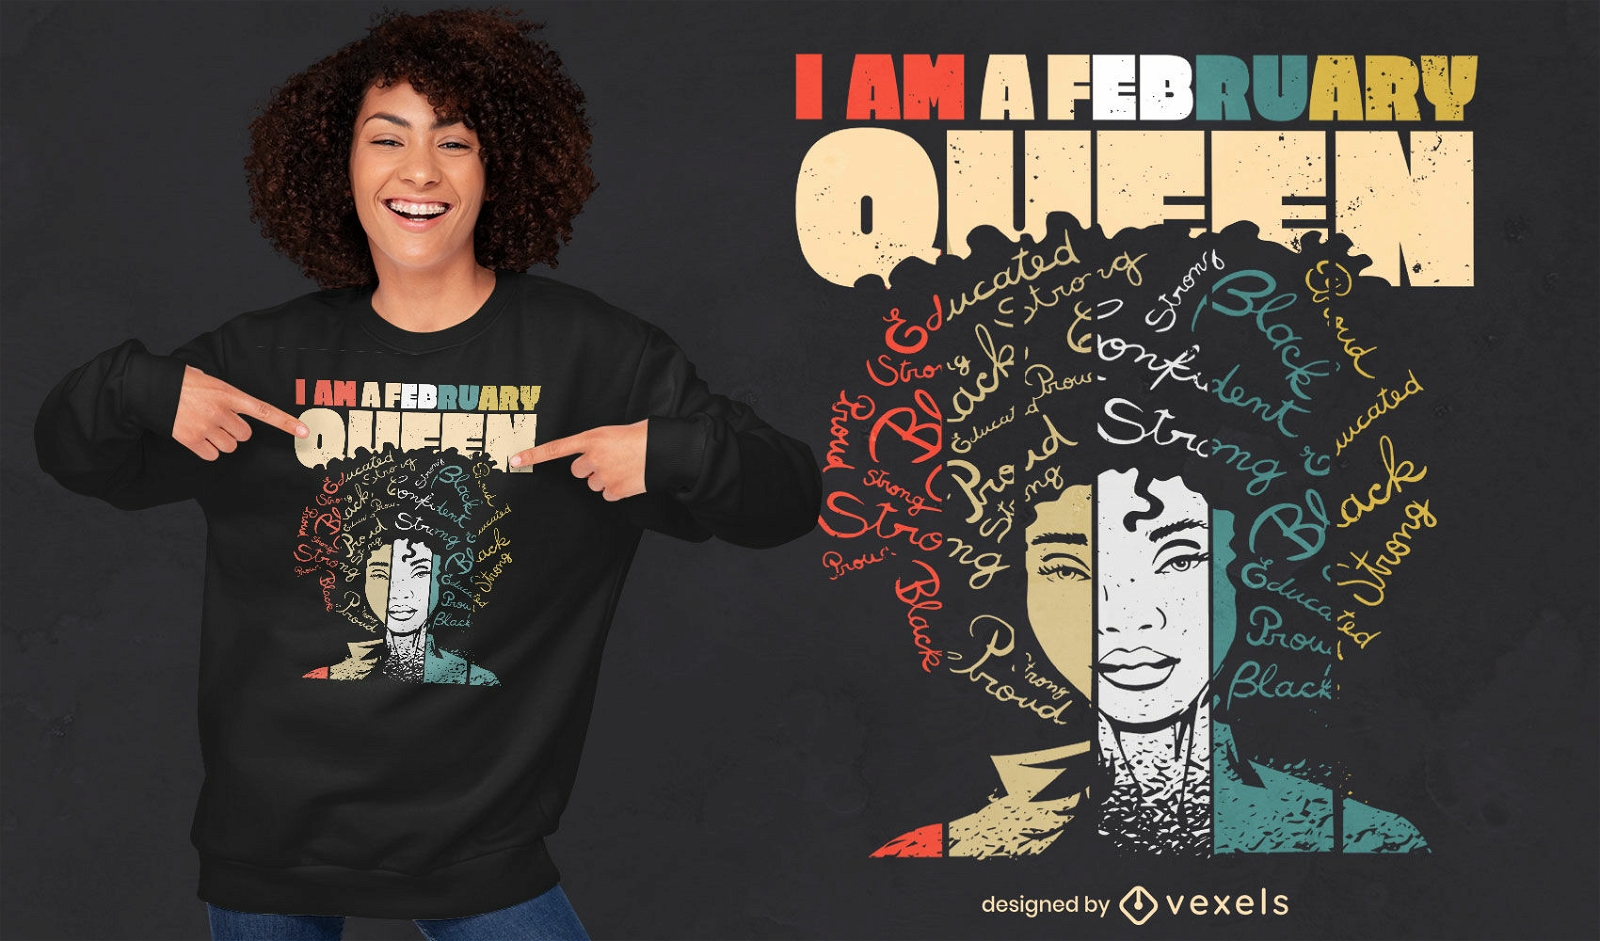 Black history month woman quote t-shirt design